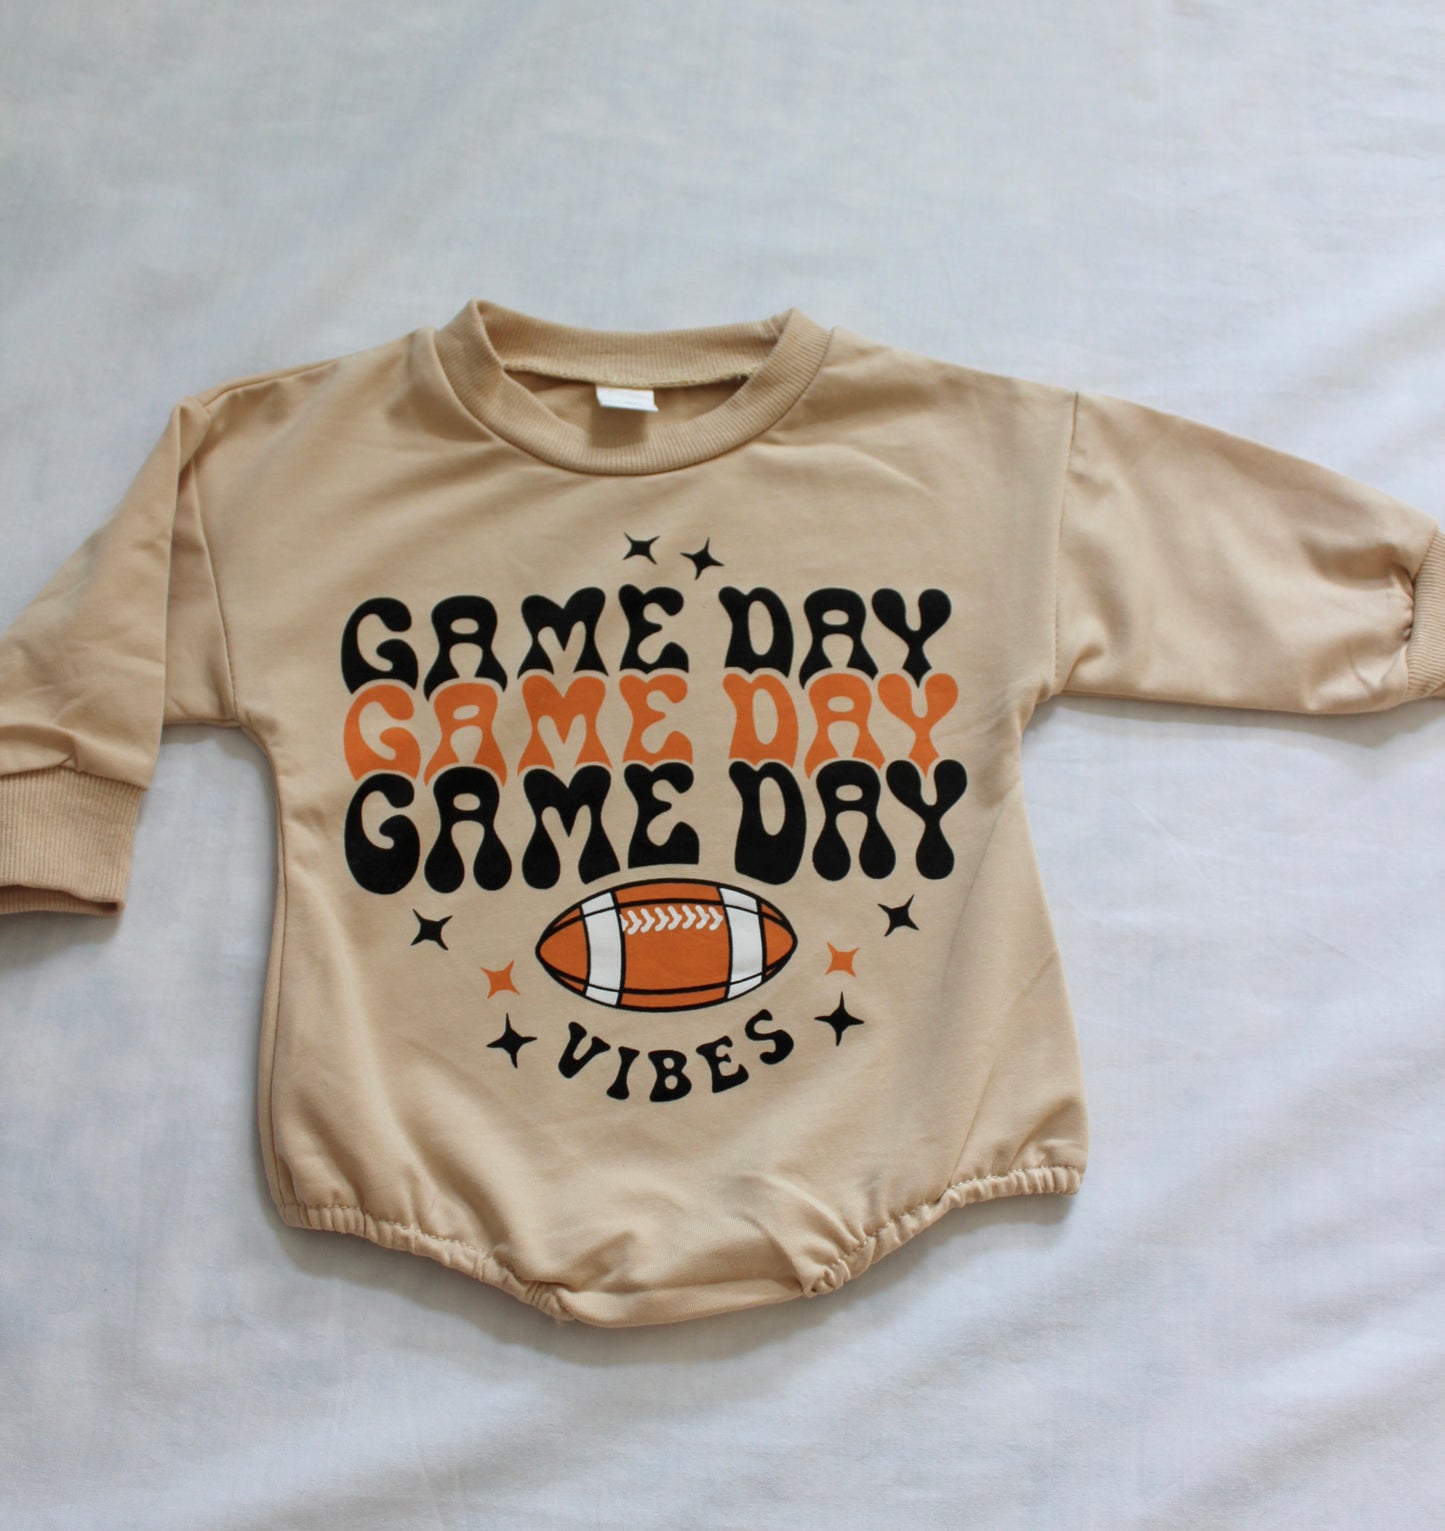 Game Day Football Romper